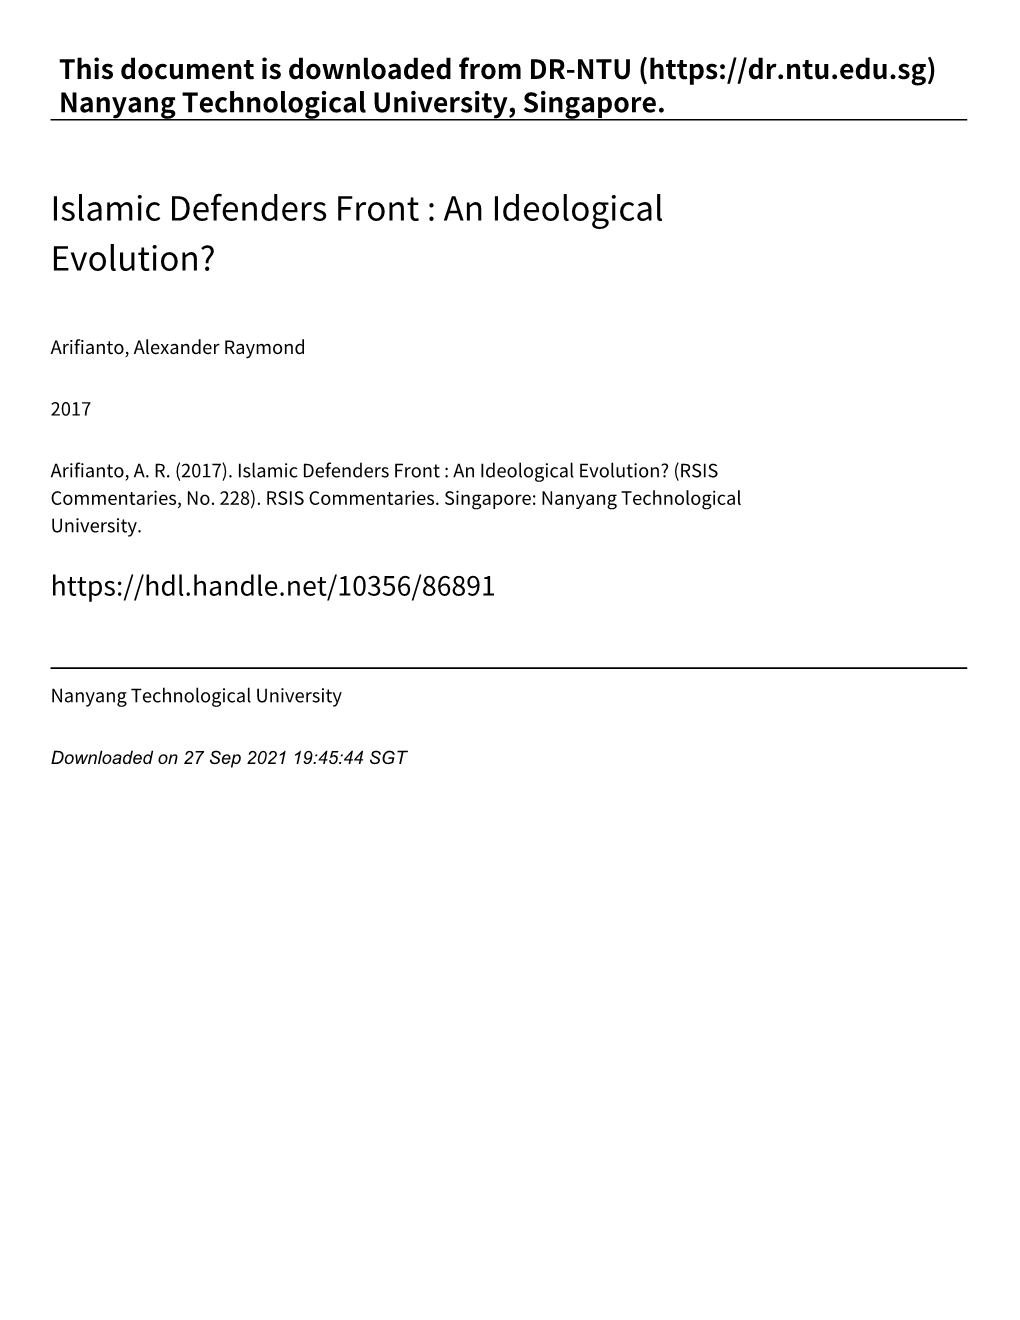 Islamic Defenders Front : an Ideological Evolution?